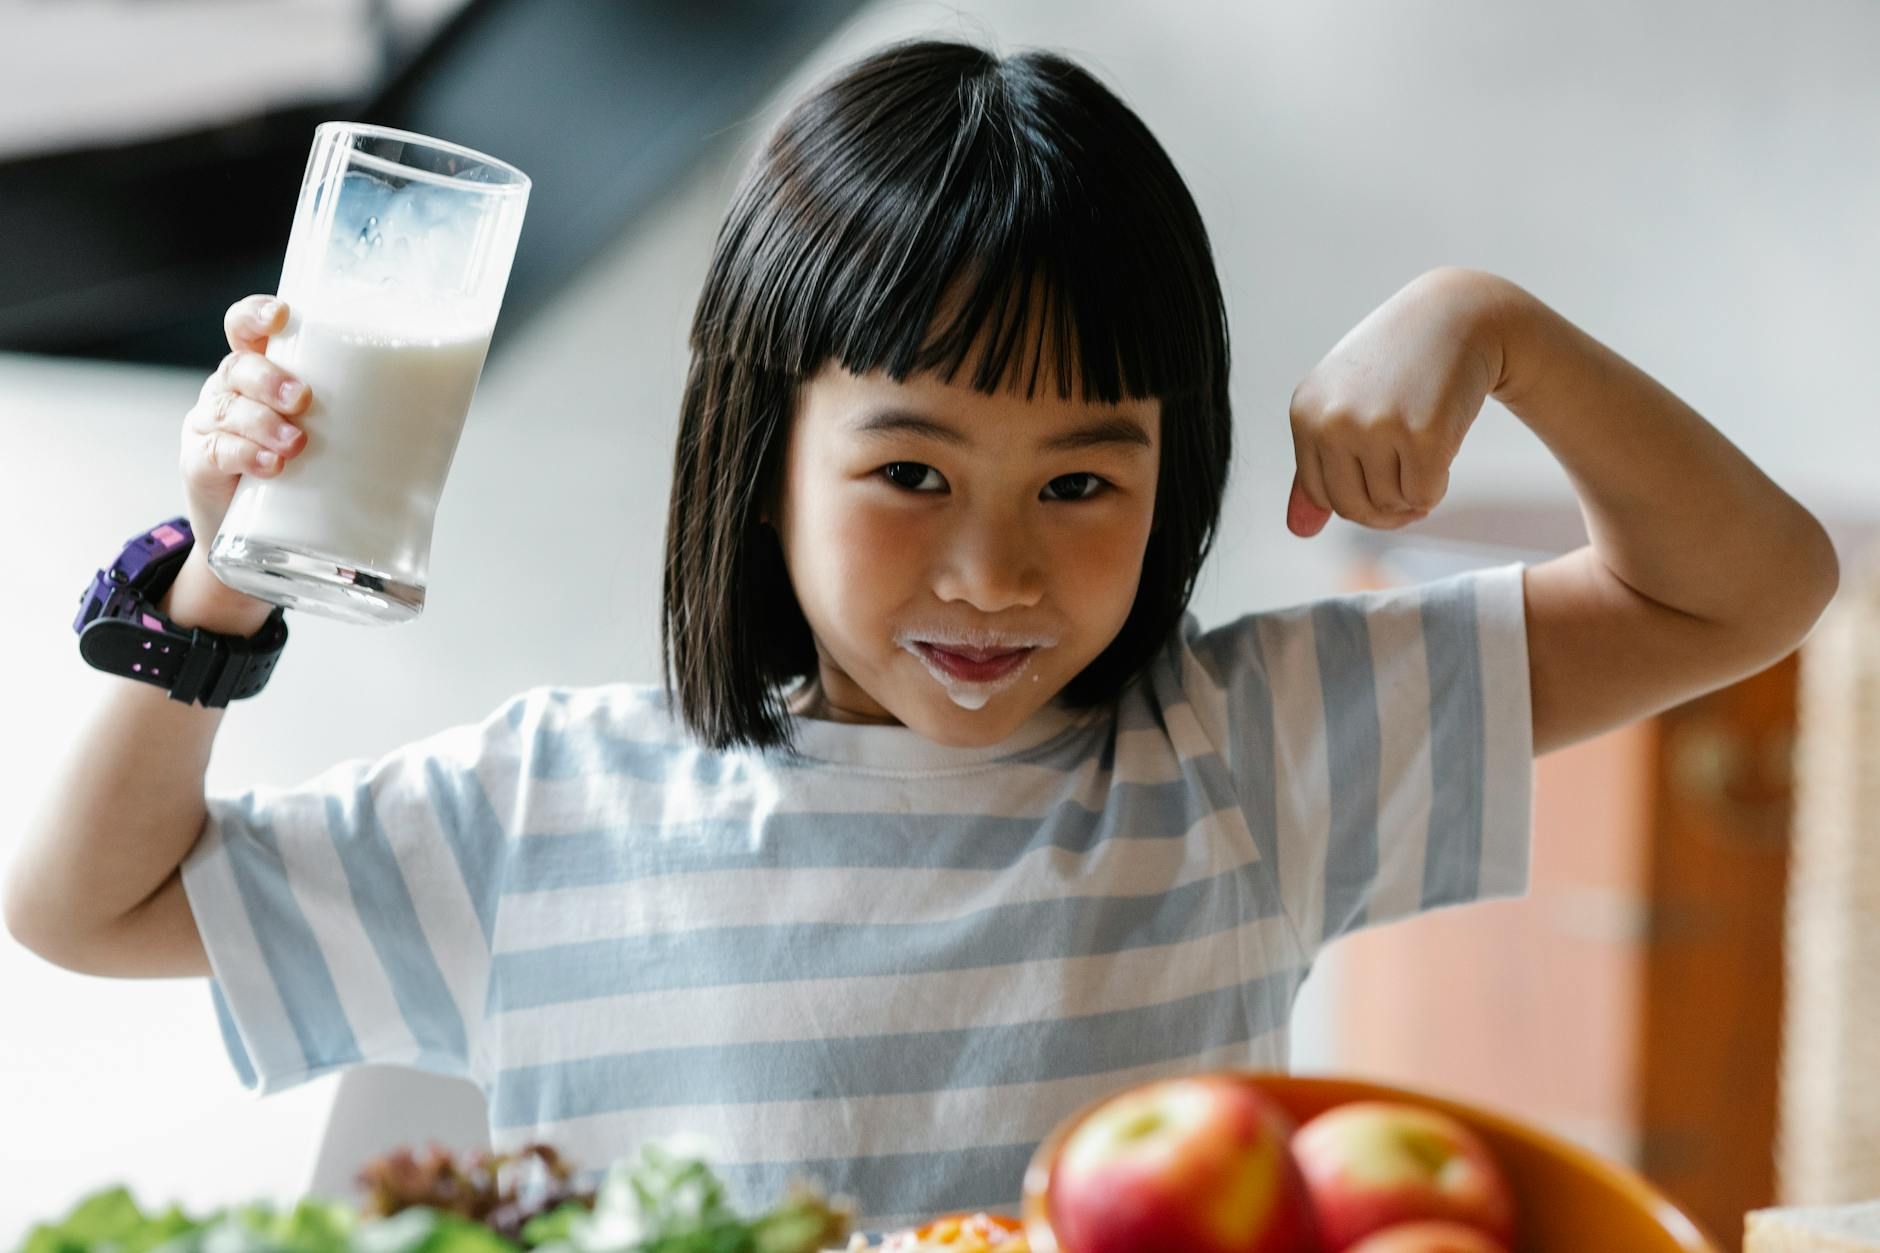 A little girl holding a glass of milk and flexing her muscles.